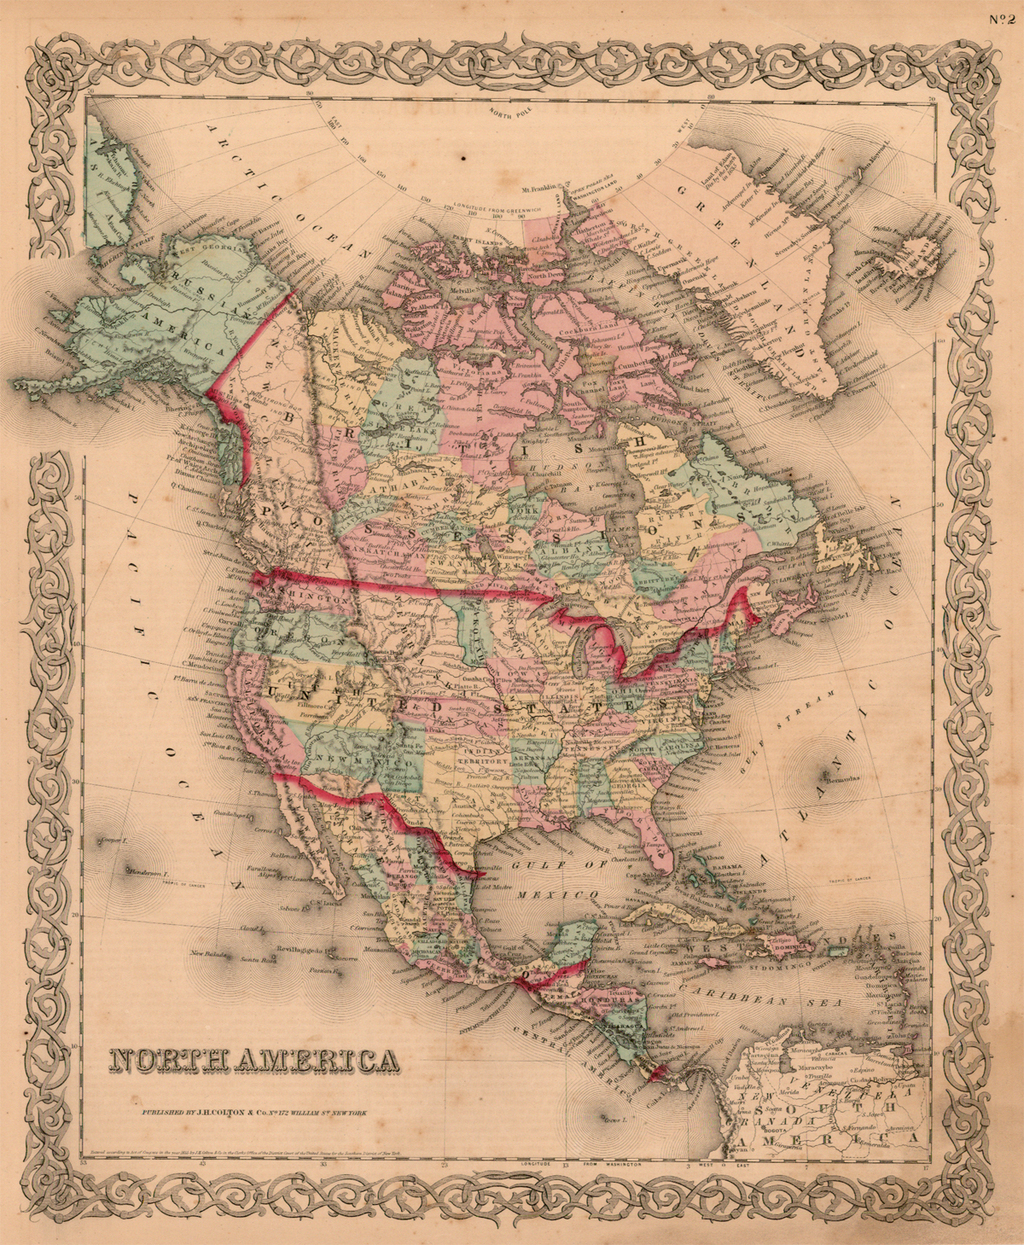 North America Barry Lawrence Ruderman Antique Maps Inc